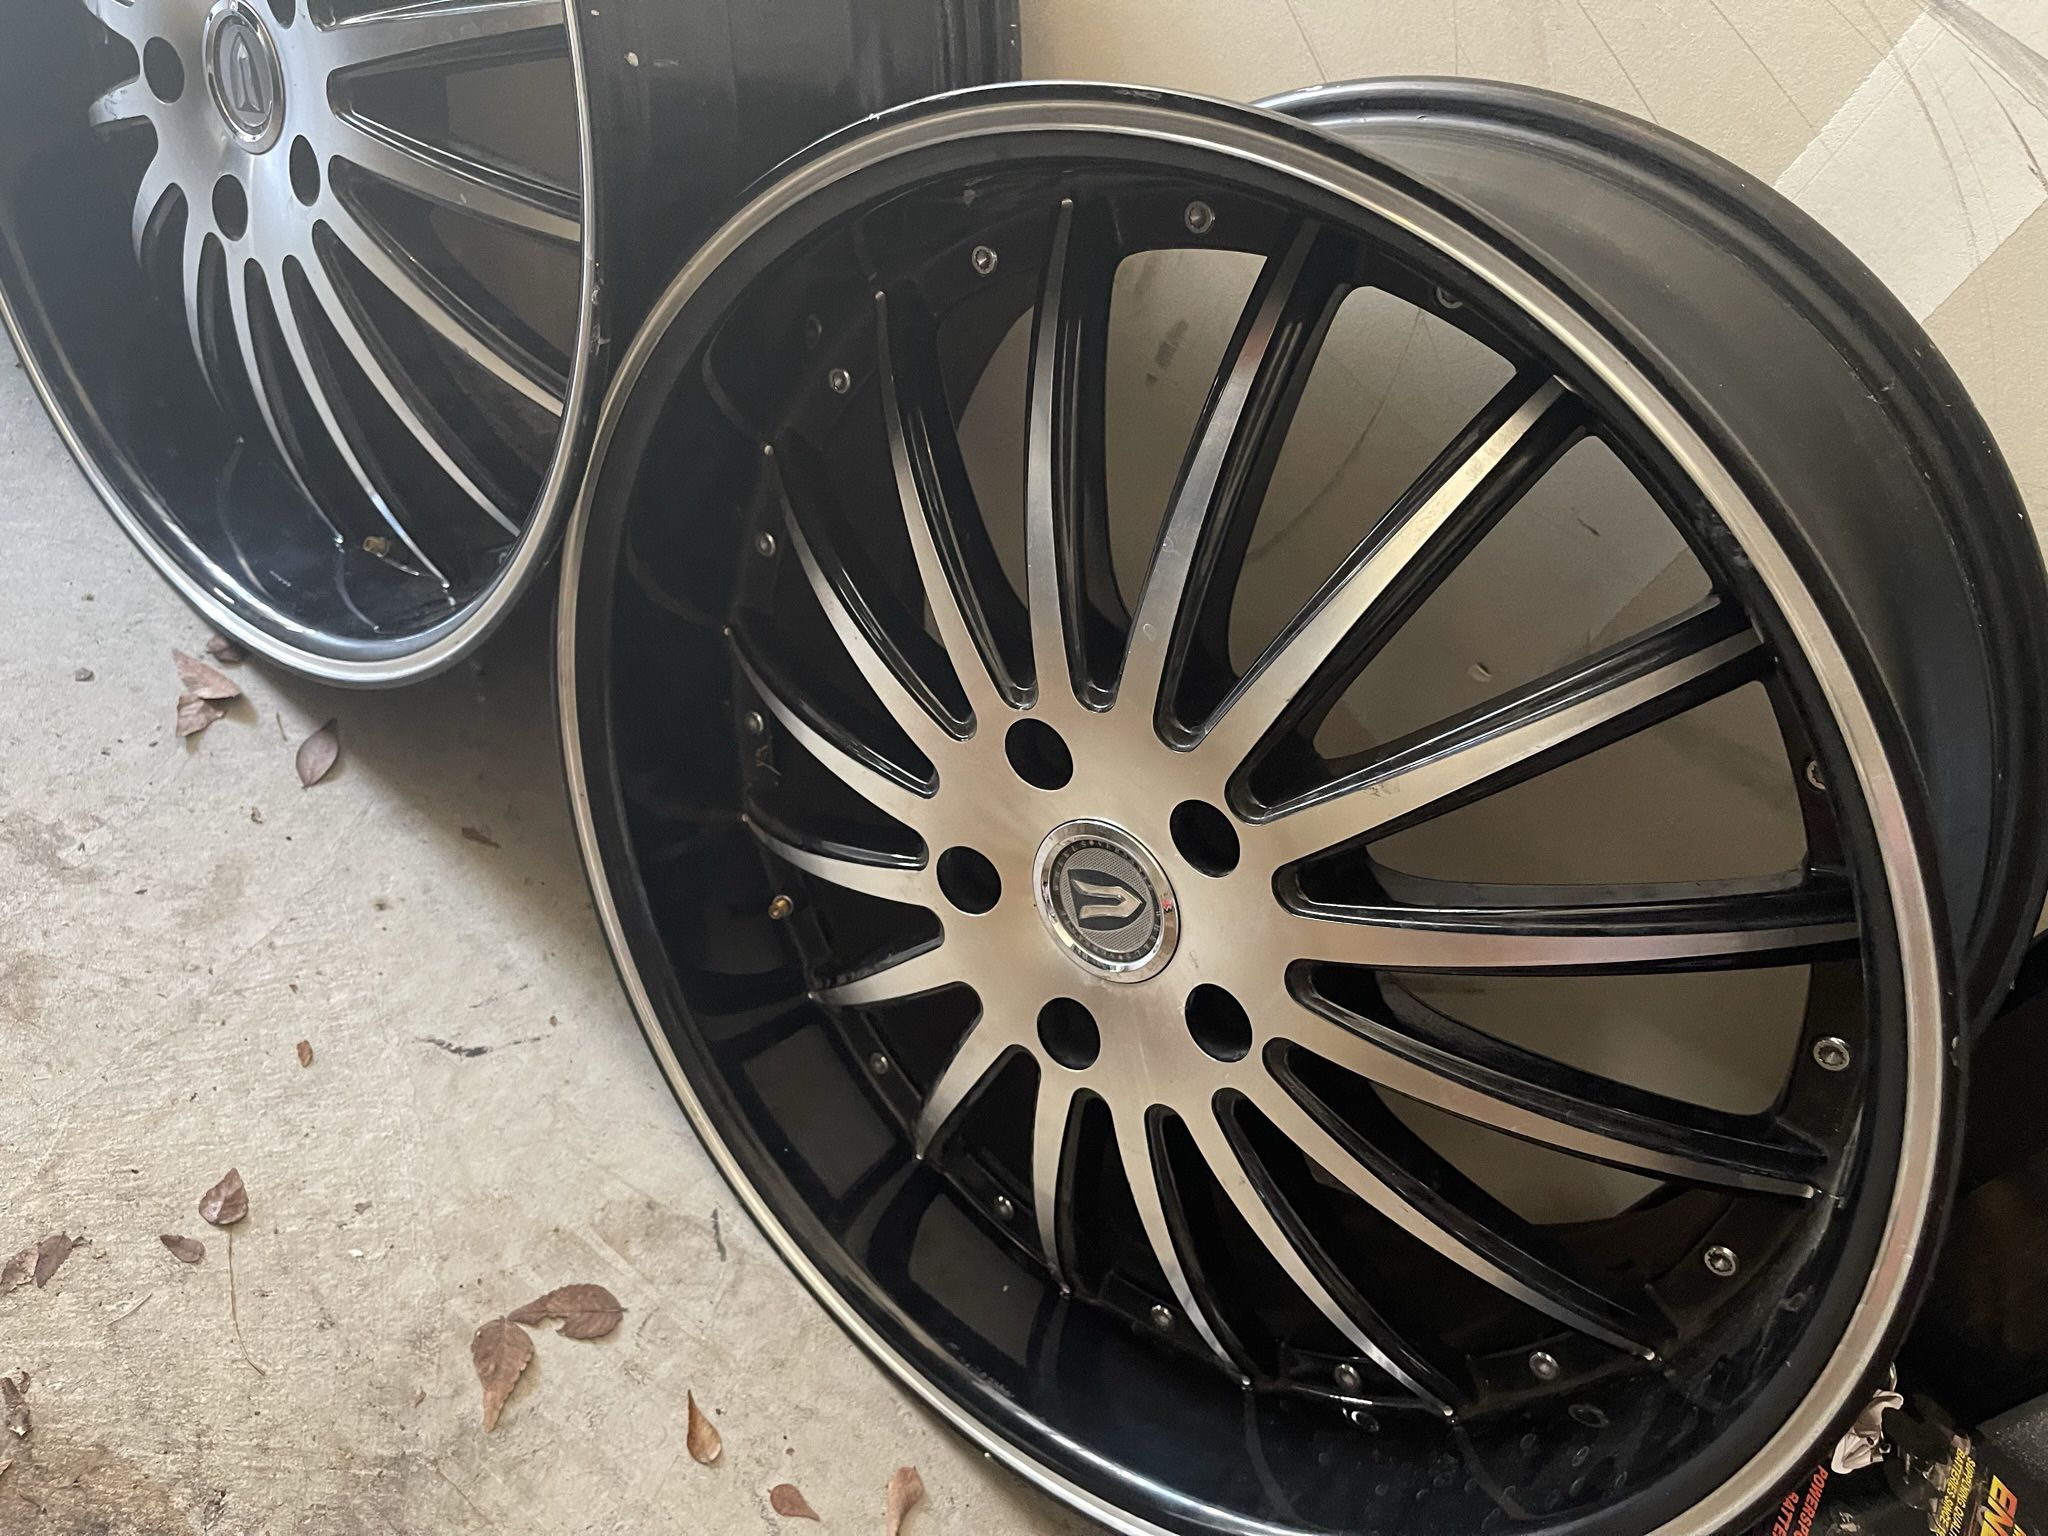 20" Rims - Sold As Is